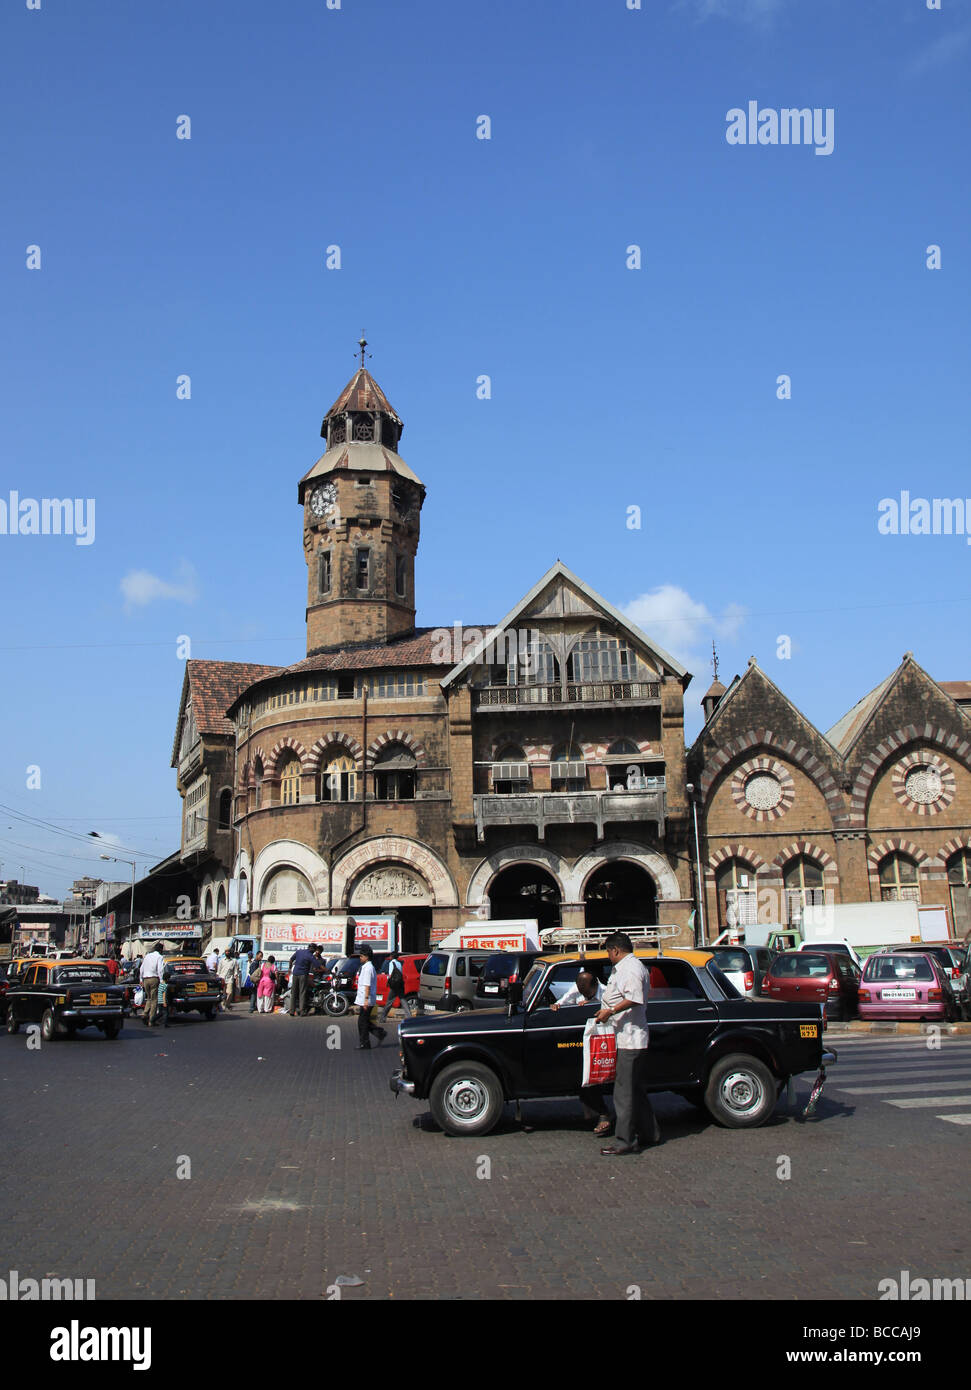 Inde Bombay Taxi Banque D'Images